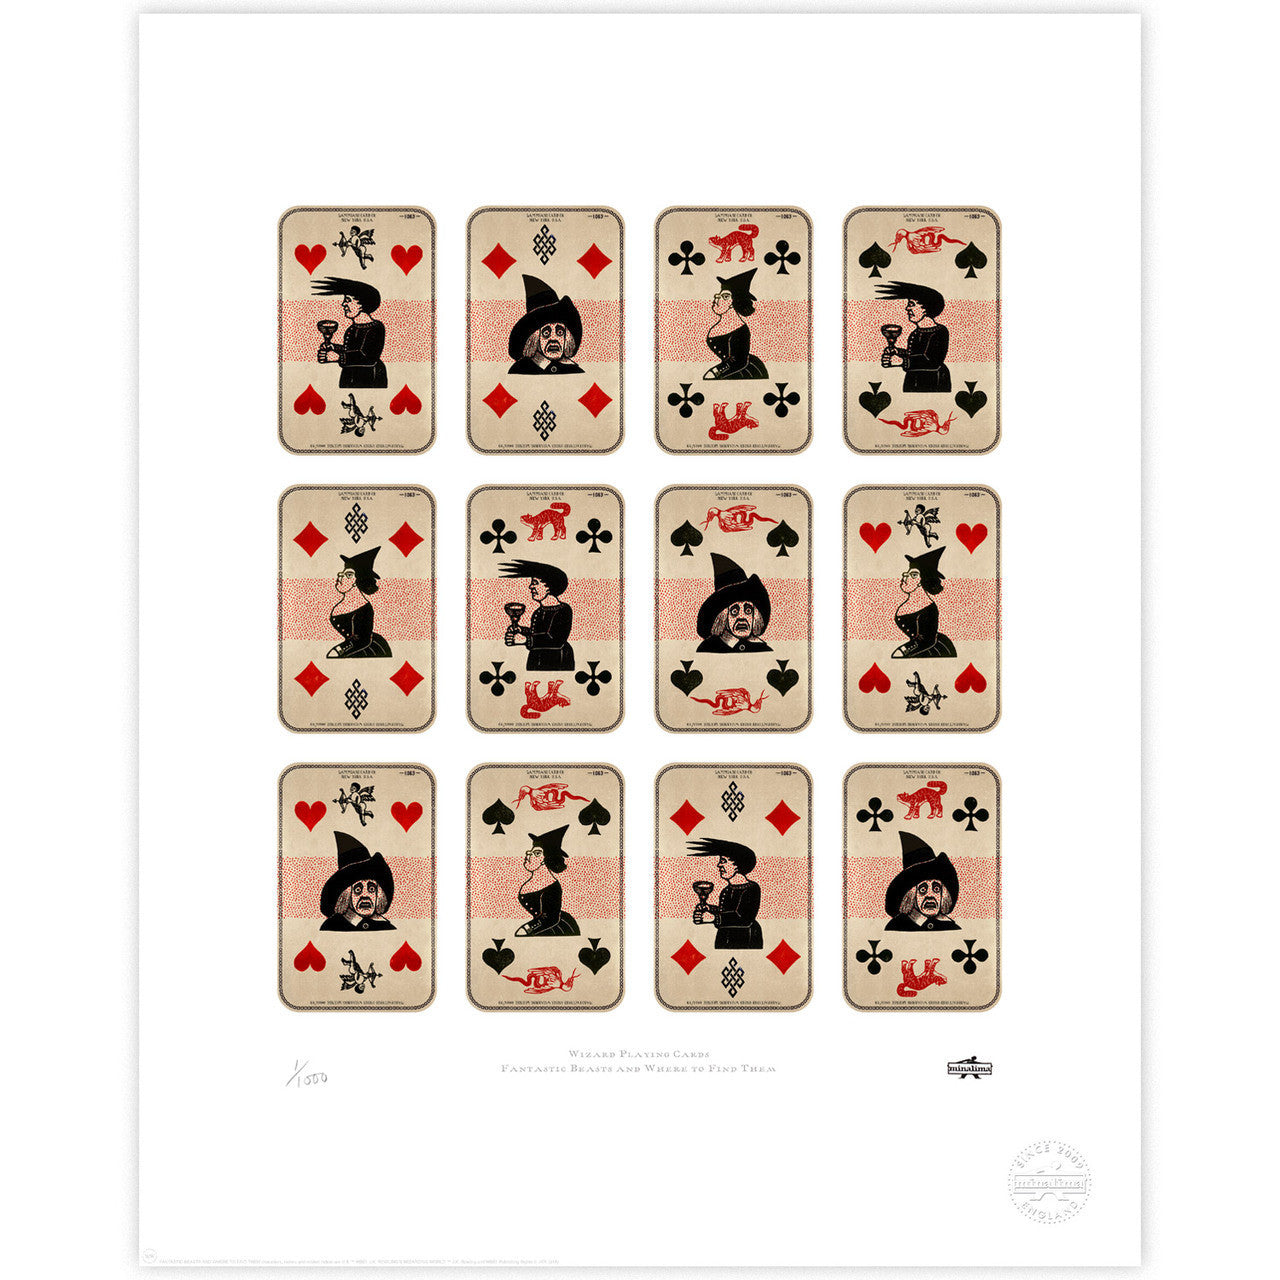 Wizarding Playing Cards Limited Edition Art Print